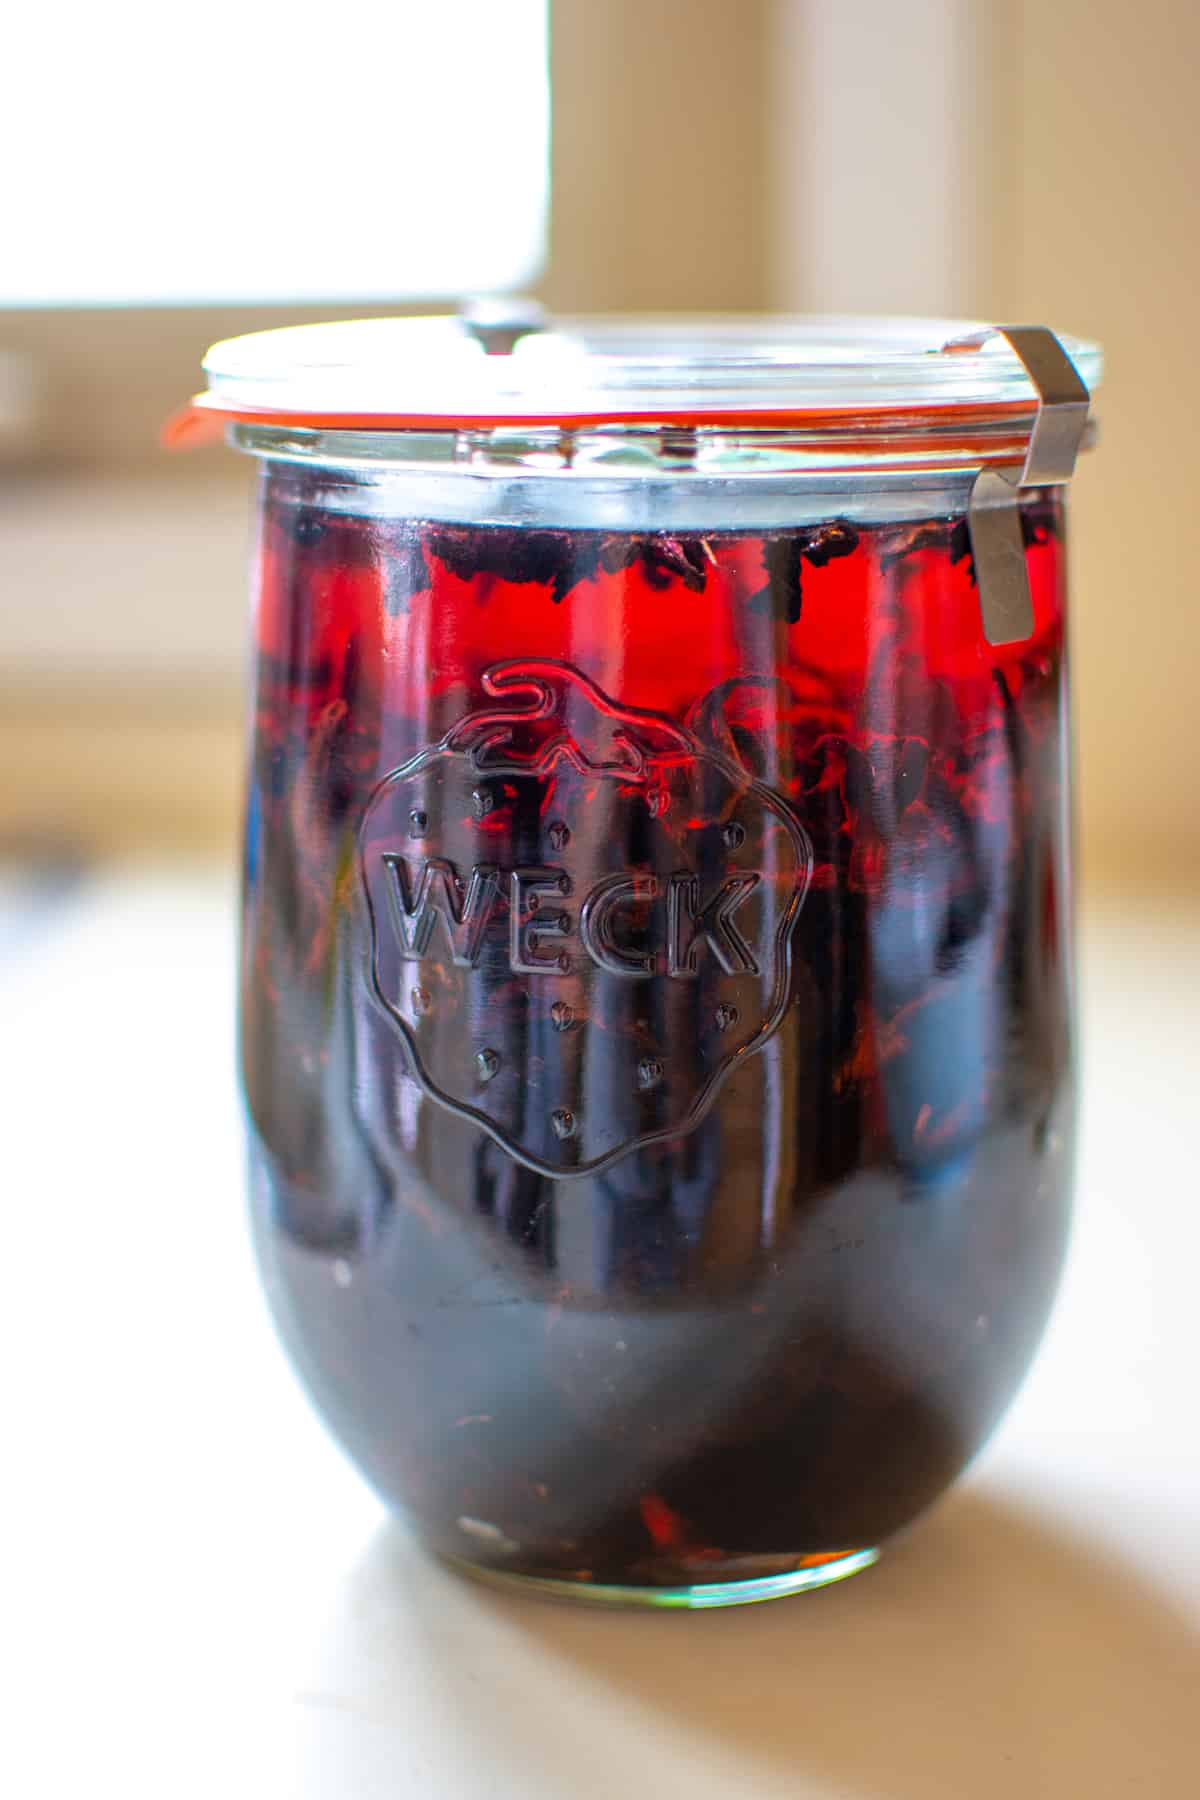 Reposado tequila gets a sweet boost from plump prunes and enlivened with tart flor de jamaica or dried hibiscus flowers with this easy to make homemade cordial. Mix together and let the tequila soak up the fruit and floral flavors then enjoy as an after dinner drink or cocktail with a splash of ginger beer. #cordial #prunes #ad #prunerecipe #flordejamaica #cocktail